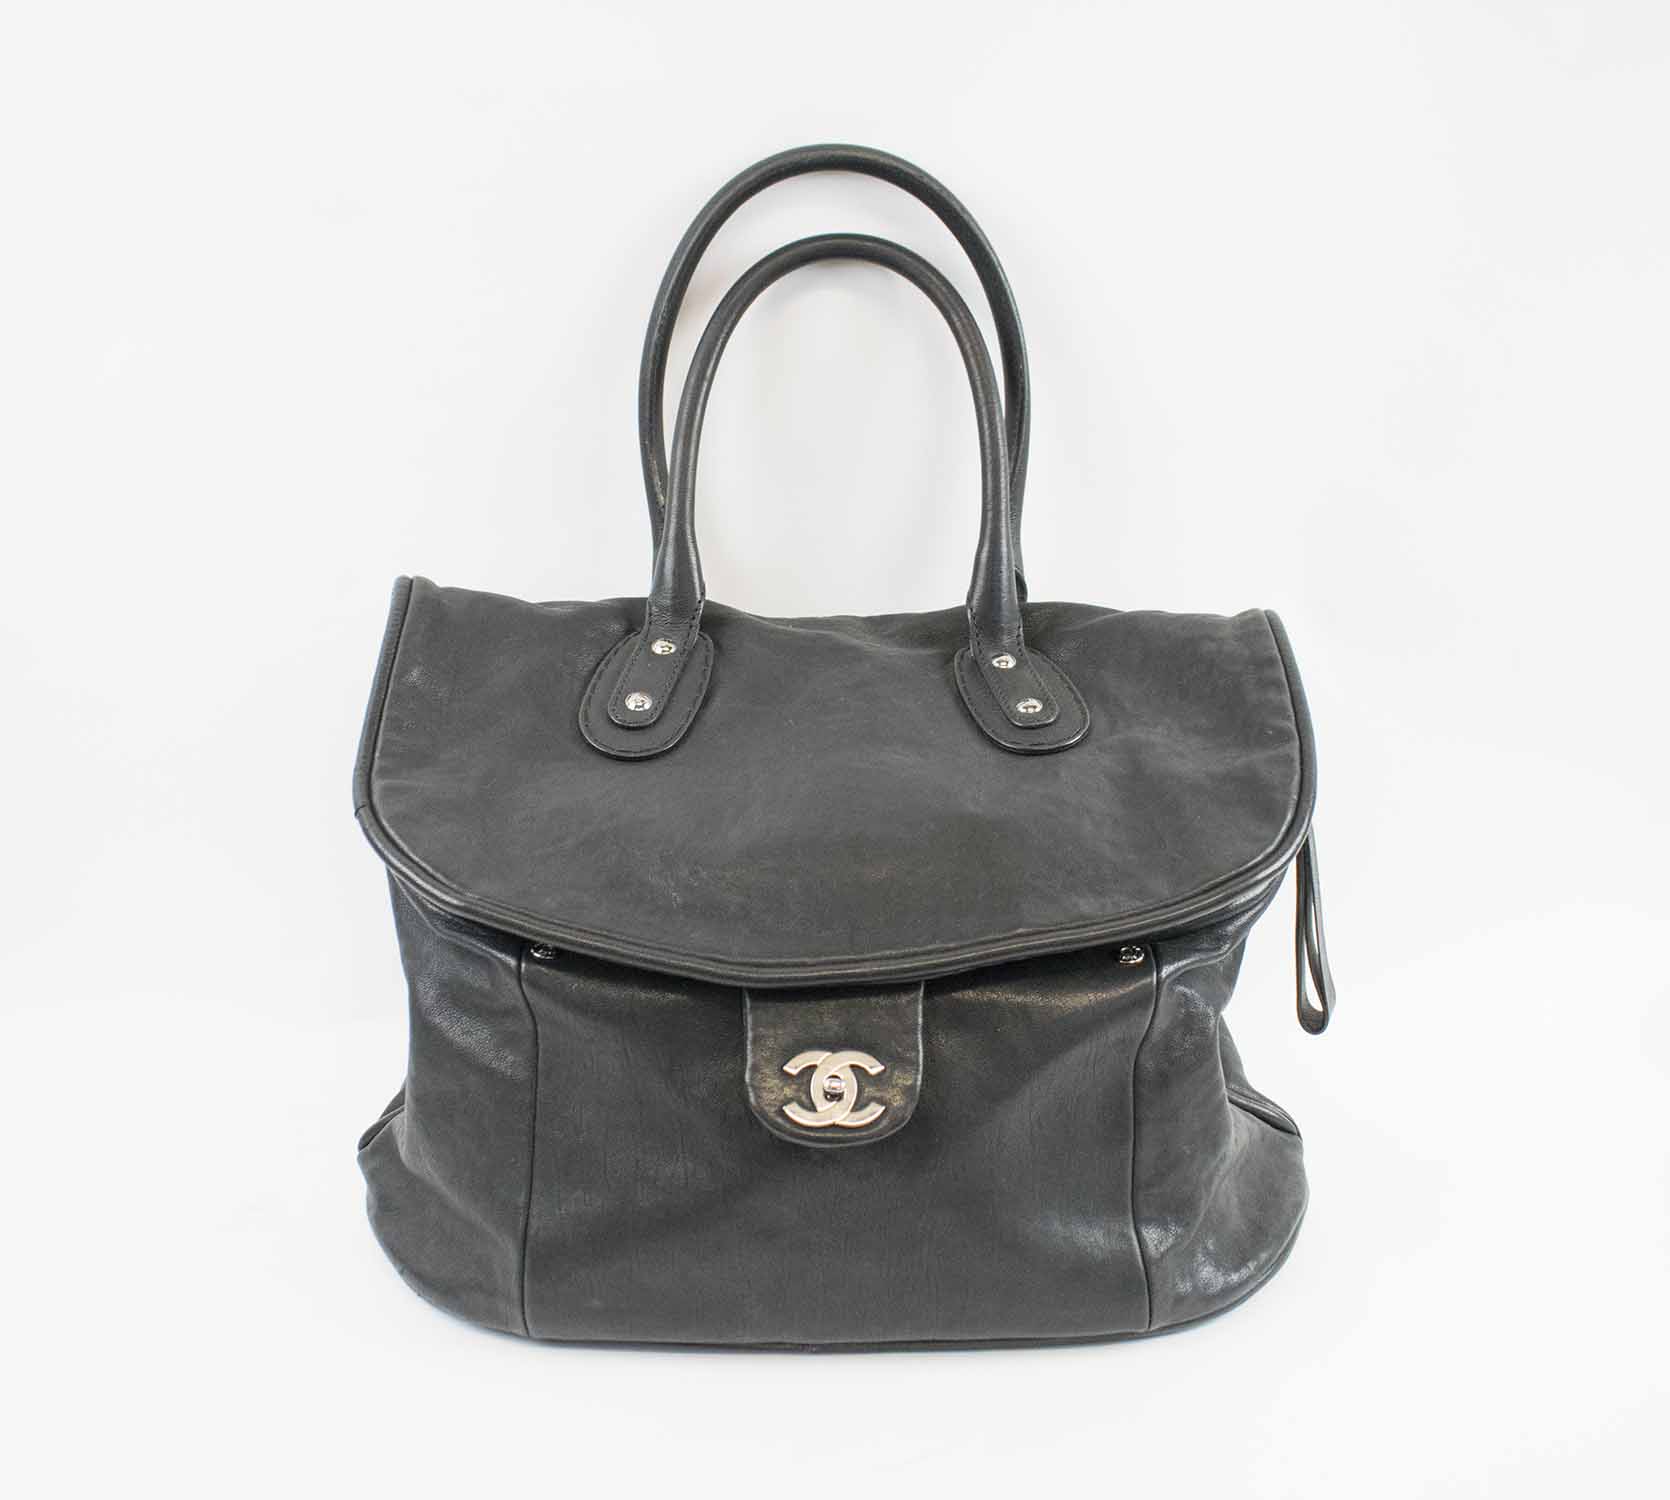 CHANEL TRAVELLING BAG, black leather with silver tone hardware, iconic